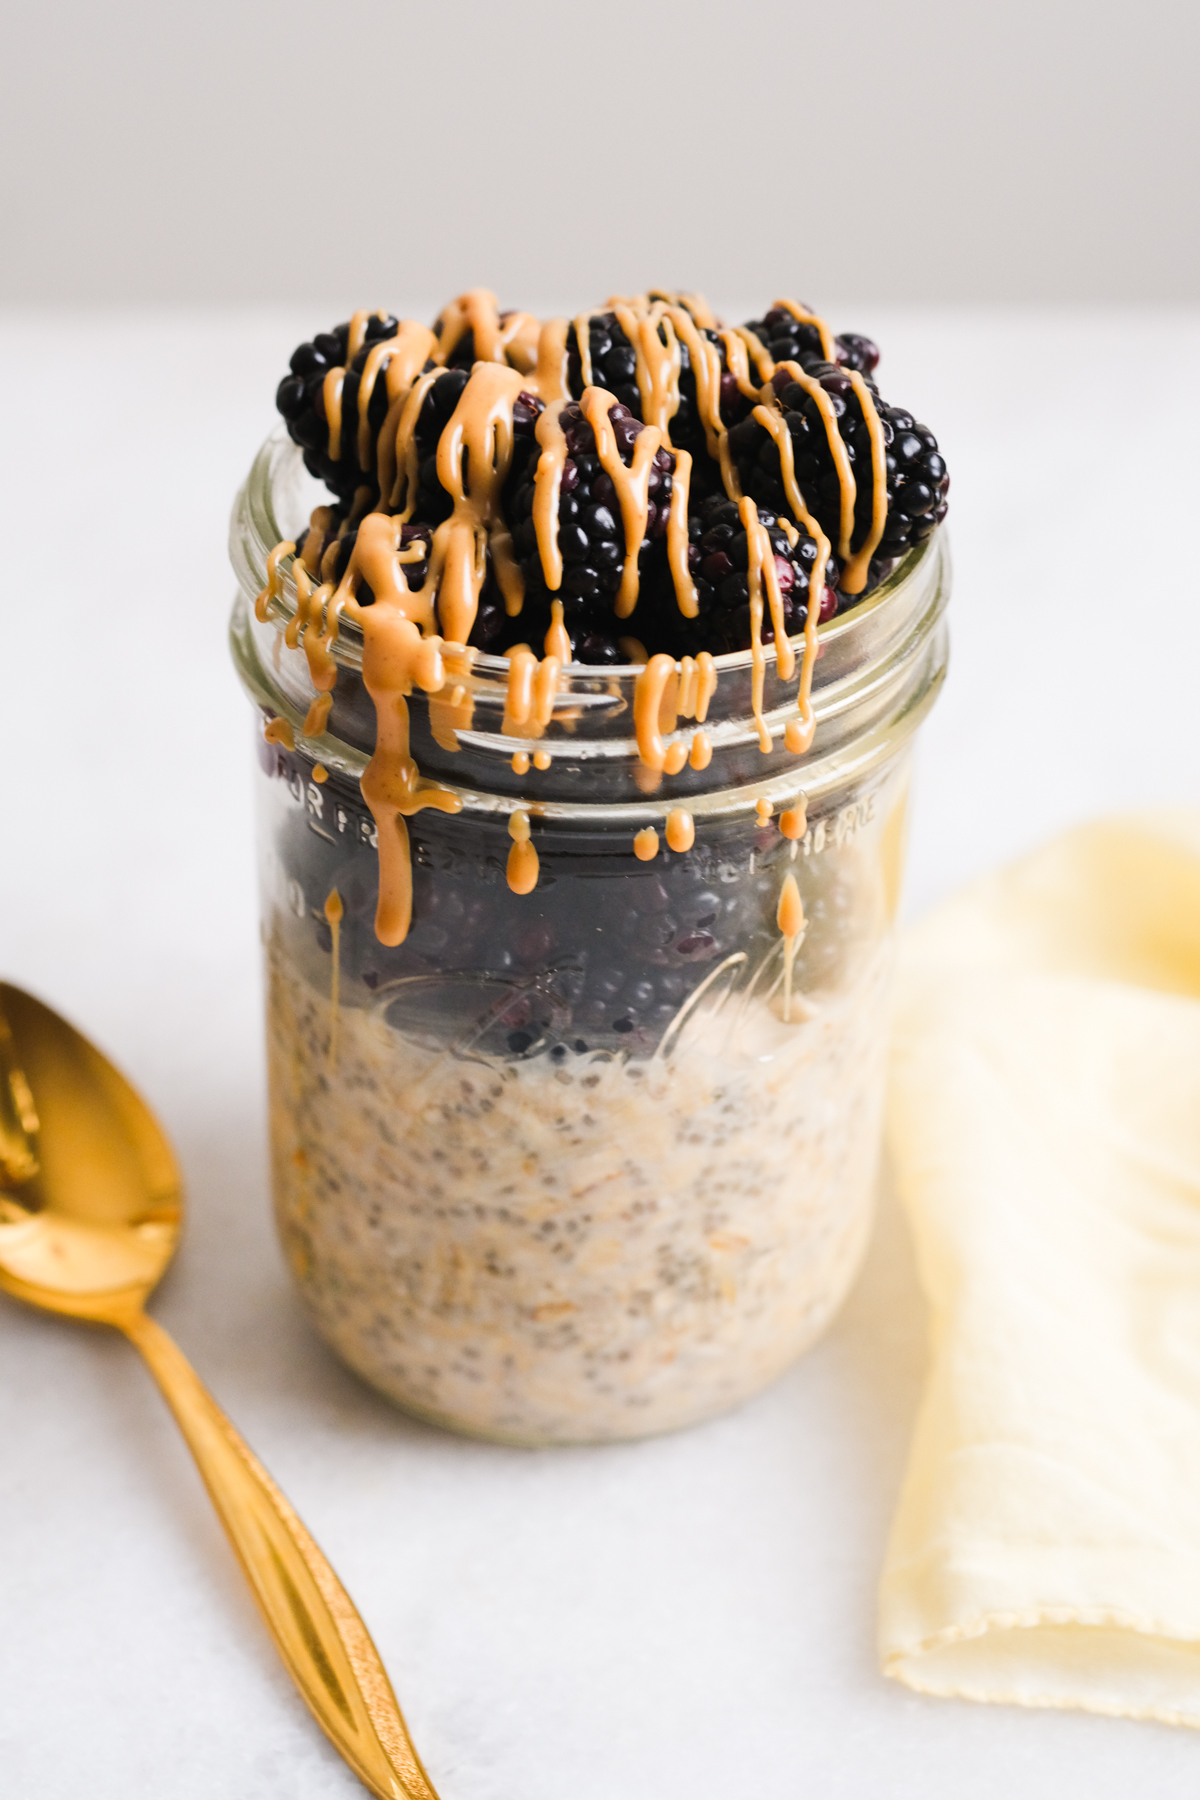 peanut butter overnight oats with berries and peanut butter drizzle